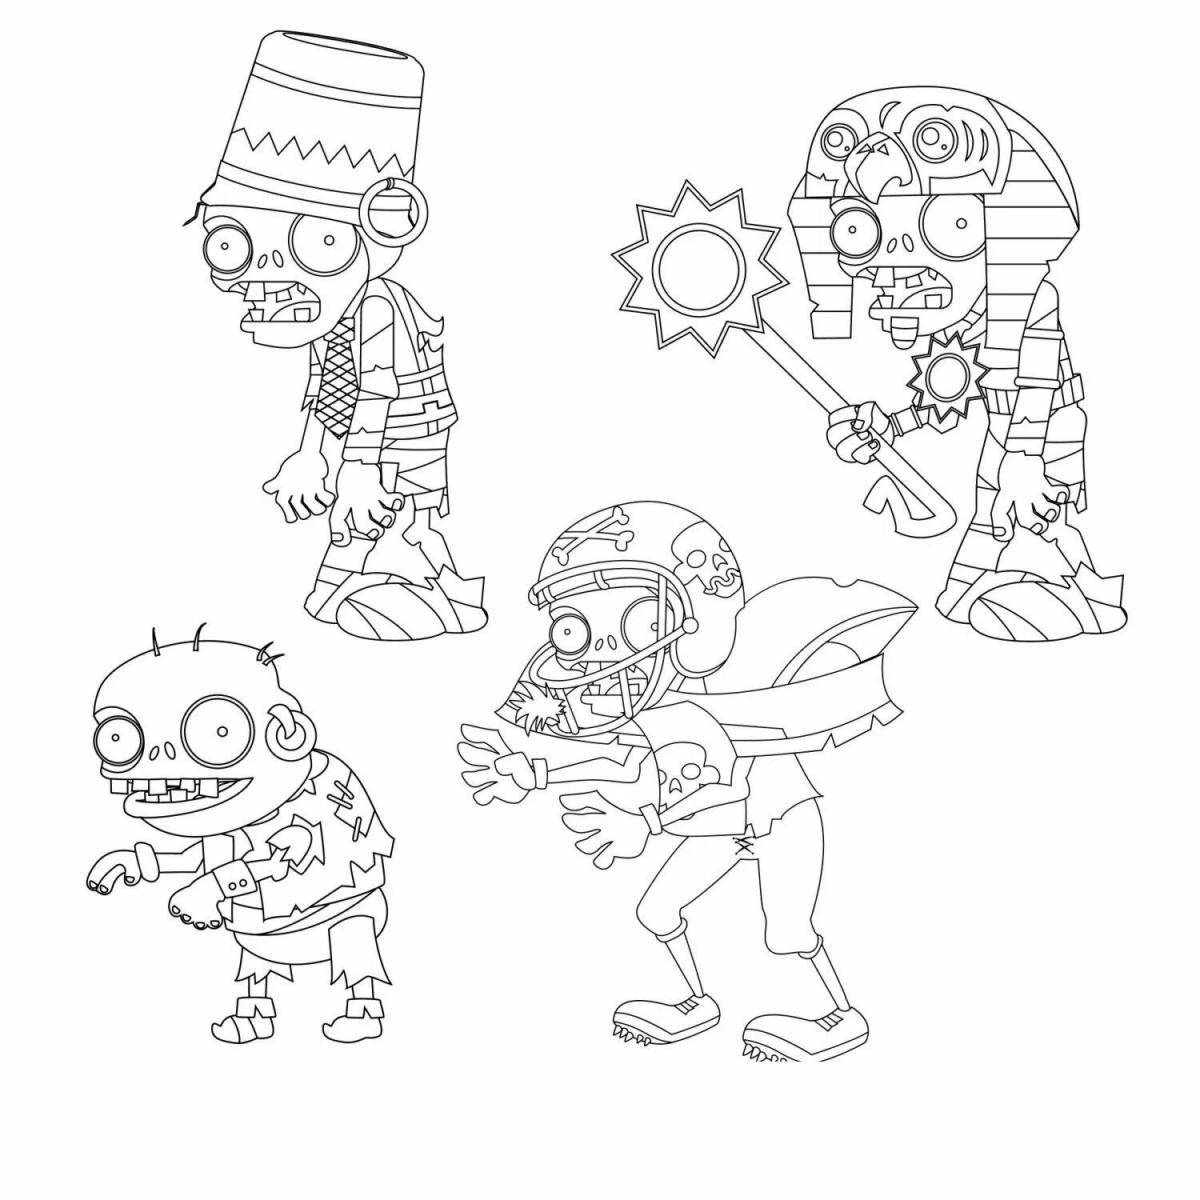 Lego zombie animated coloring page